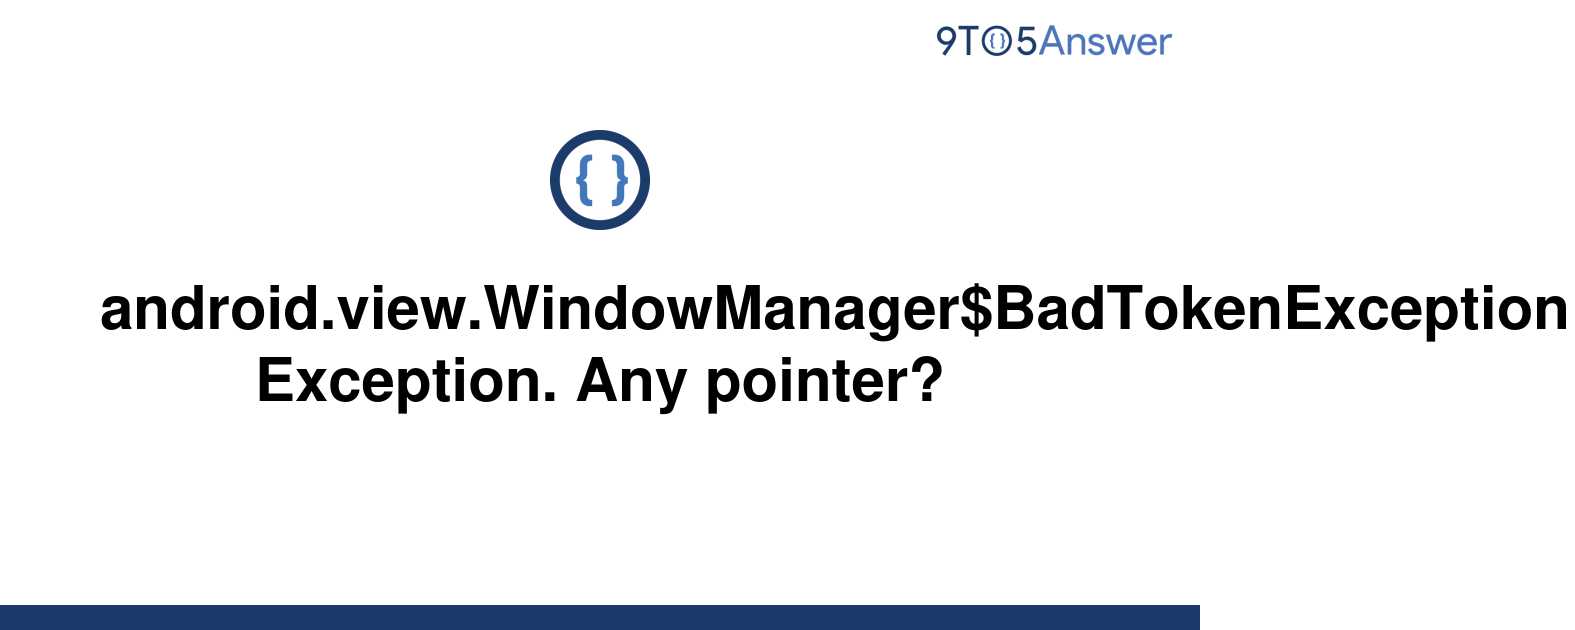 instal the last version for android WindowManager 10.13.2